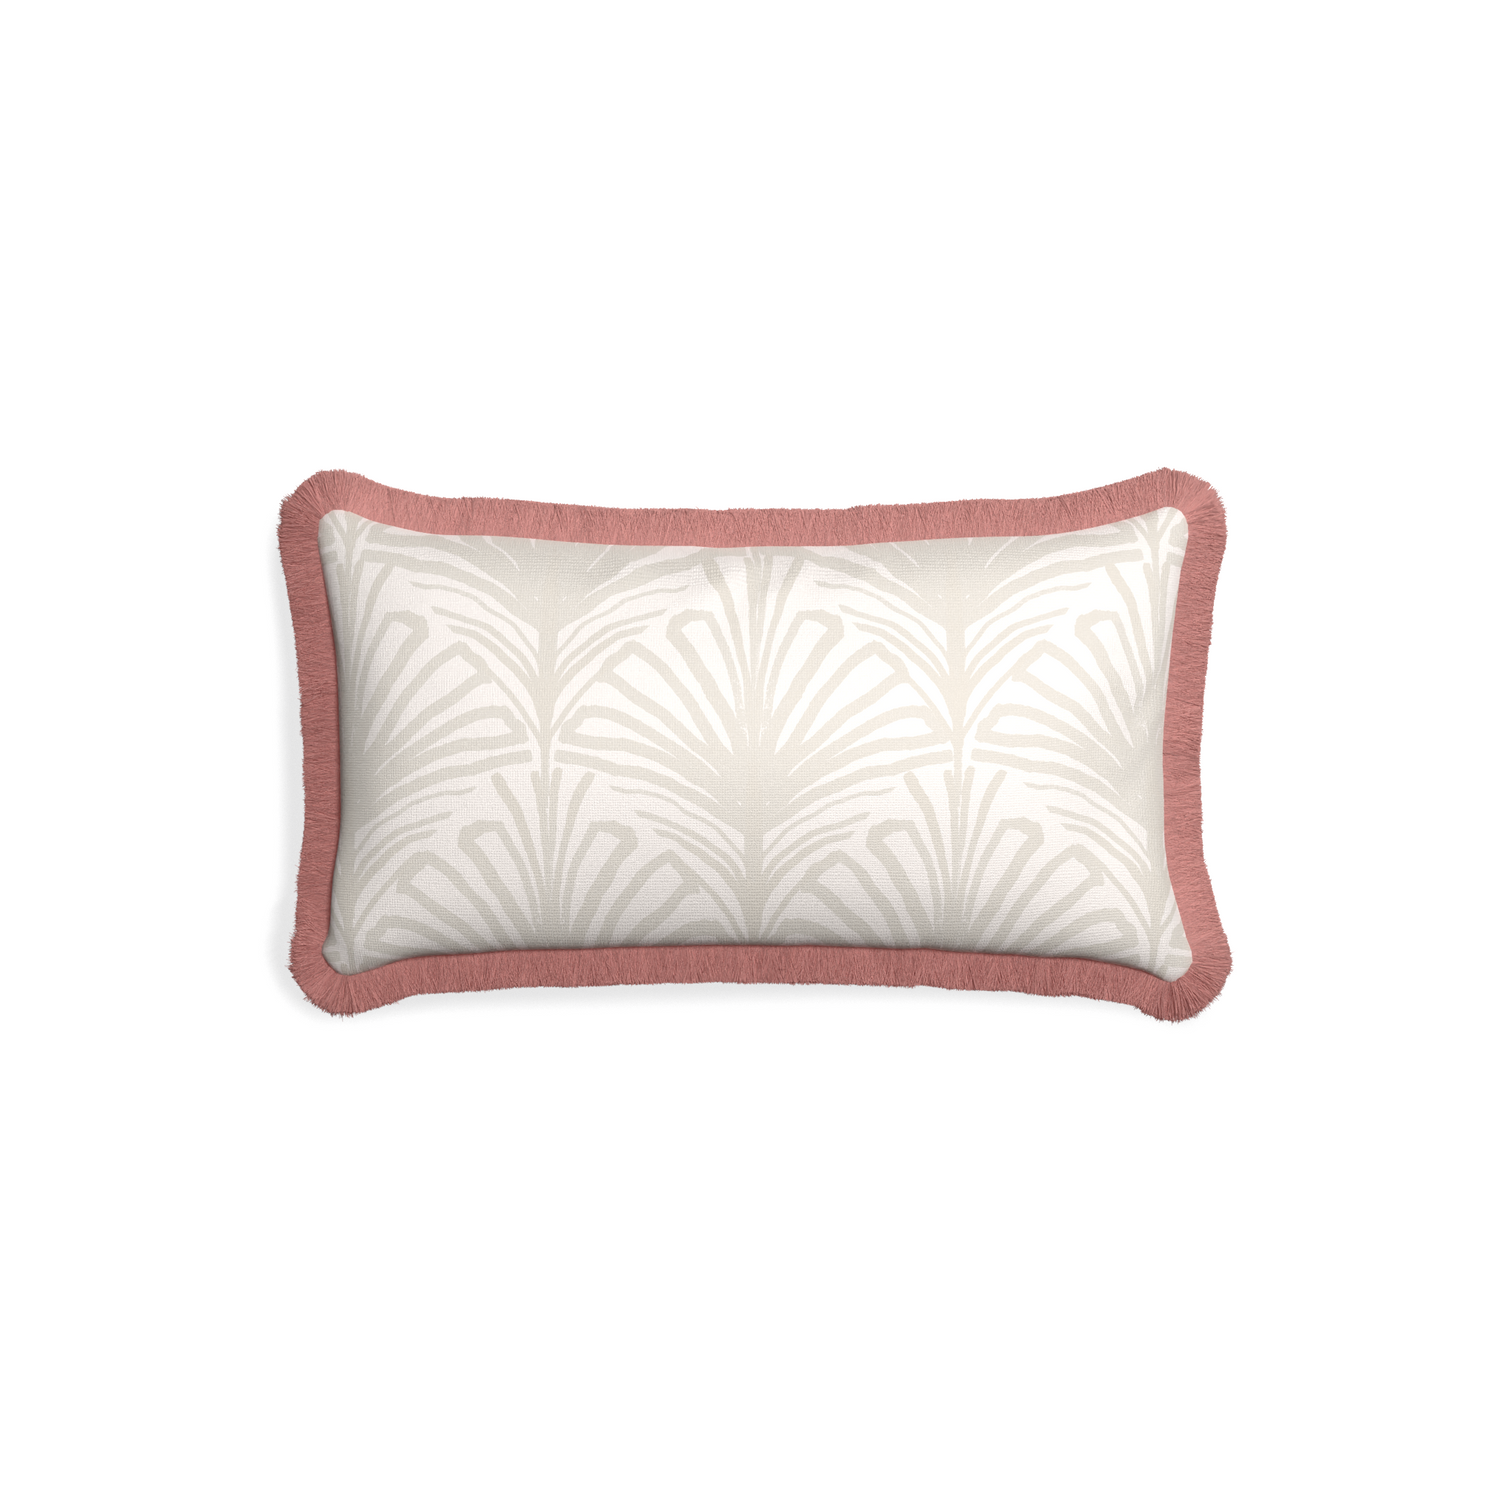 Petite-lumbar suzy sand custom beige palmpillow with d fringe on white background